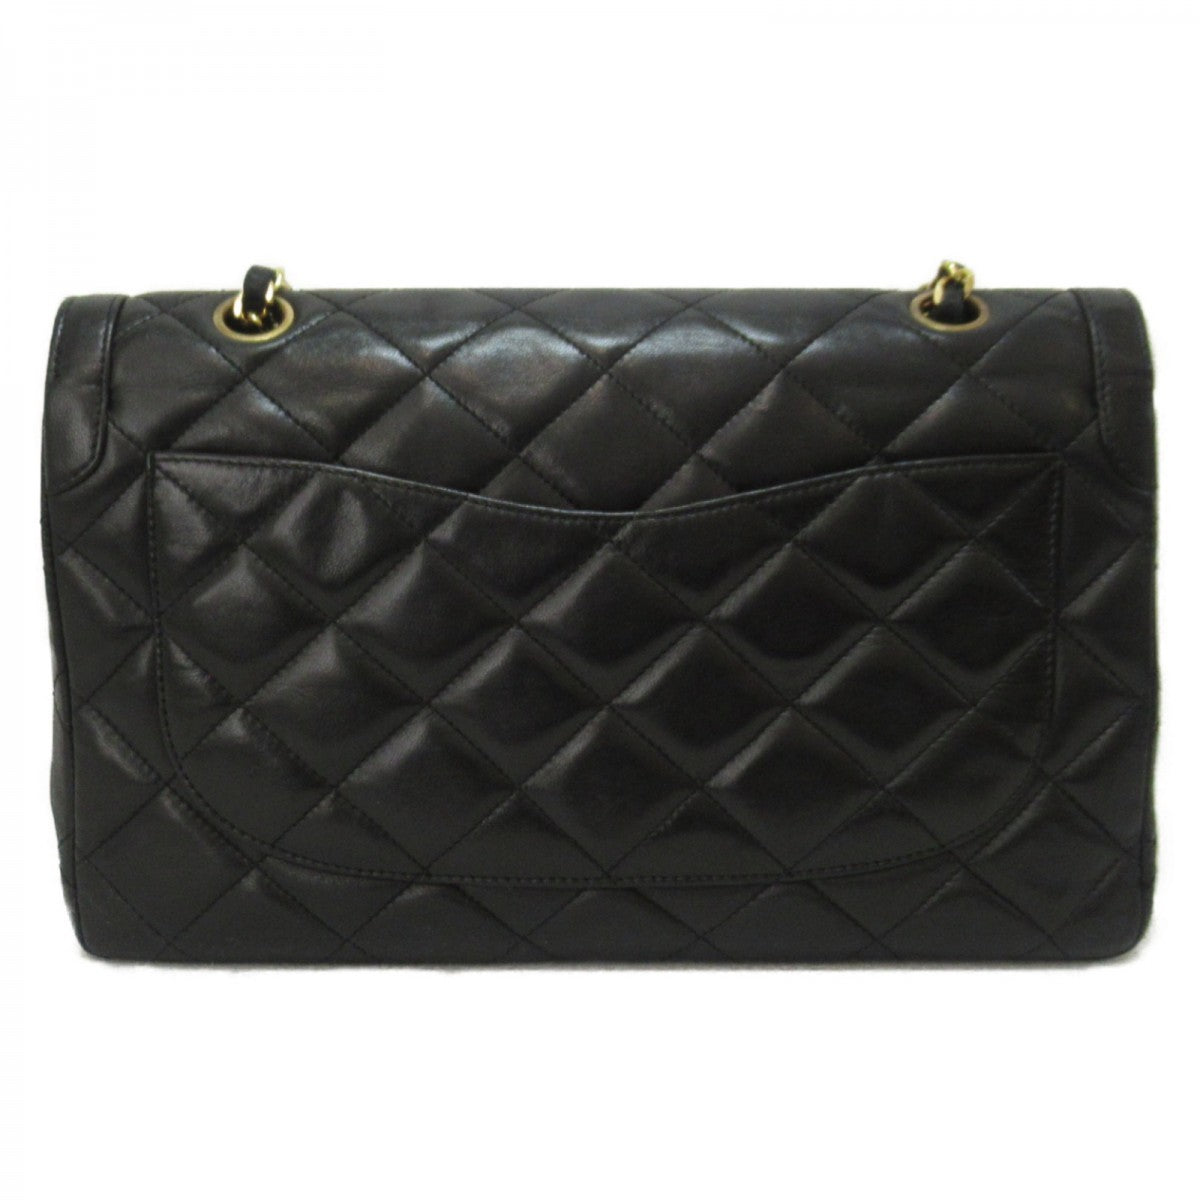 CC Quilted Leather Double Flap Bag